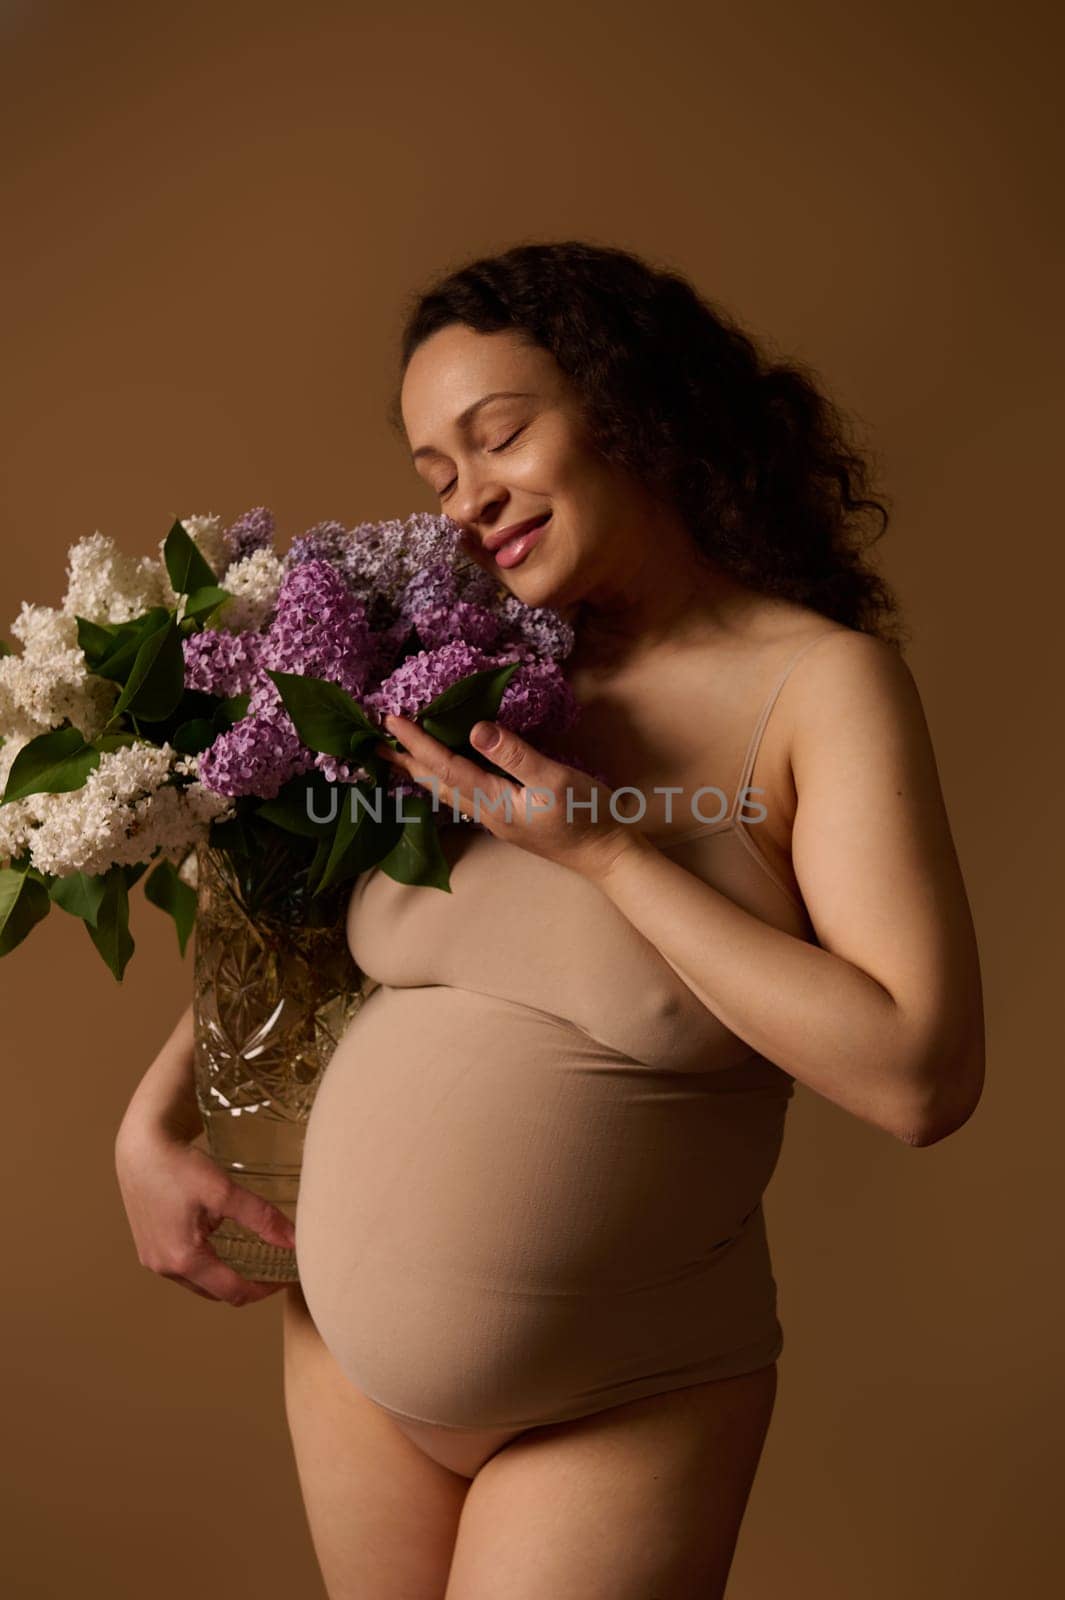 Delightful gravid pregnant woman in beige lingerie, posing with purple and while blooming lilacs, on beige background by artgf